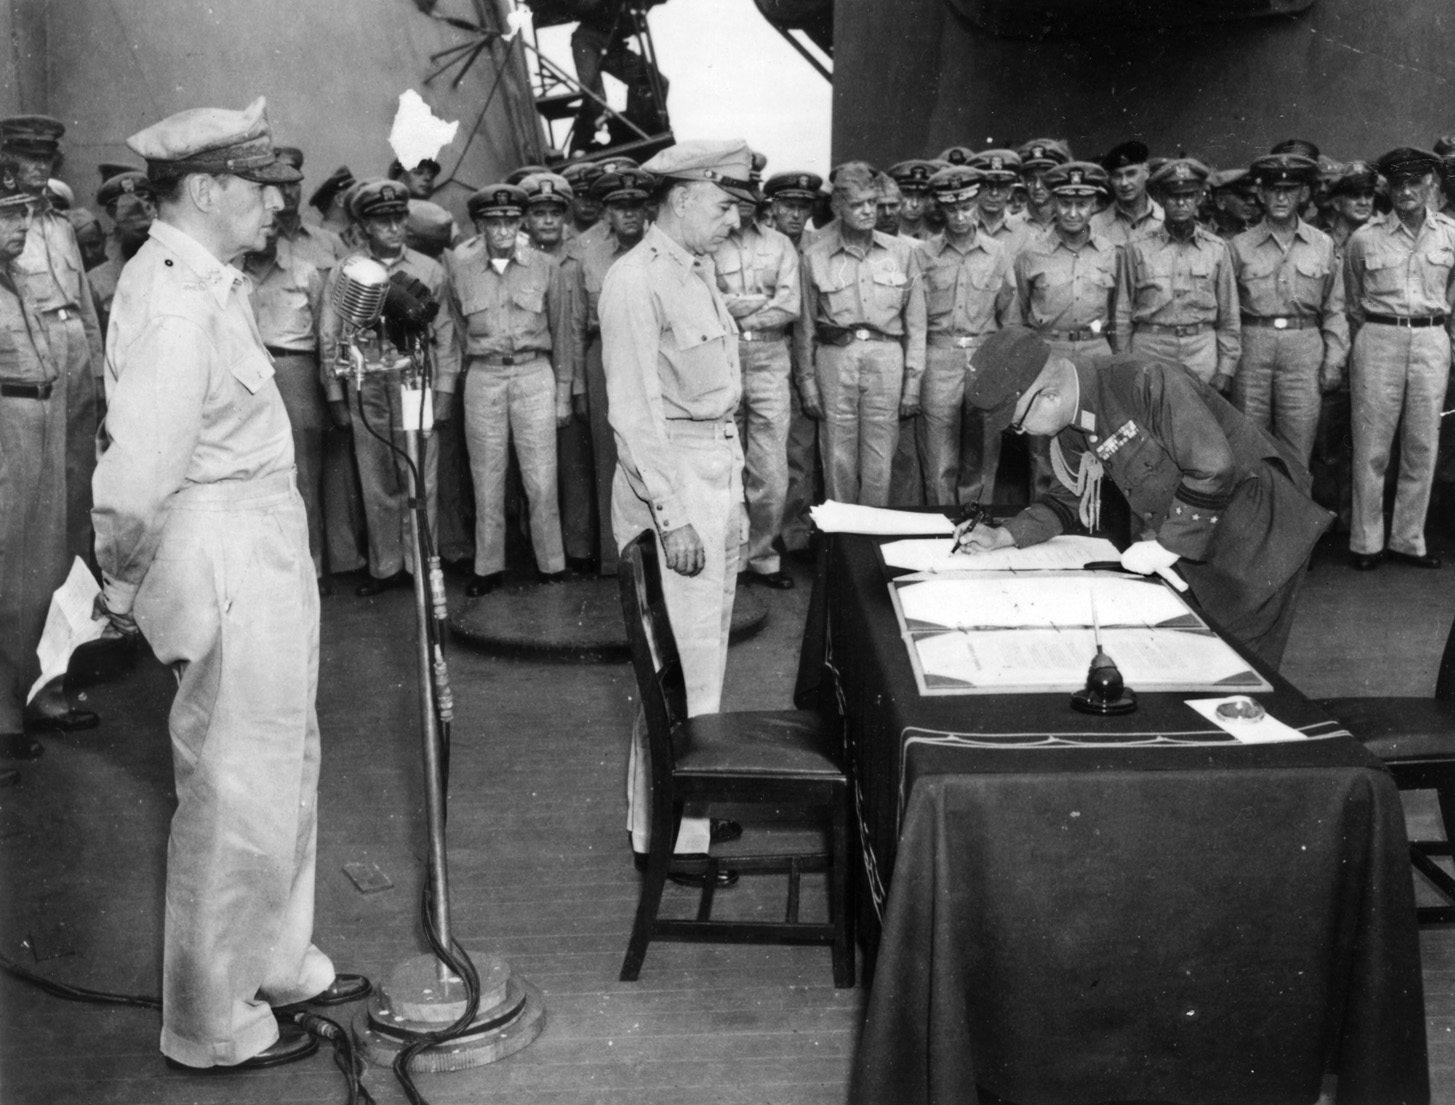 This photo of General Douglas MacArthur at the microphone was taken by Charles Restifo during the Japanese surrender ceremony aboard the USS Missouri.